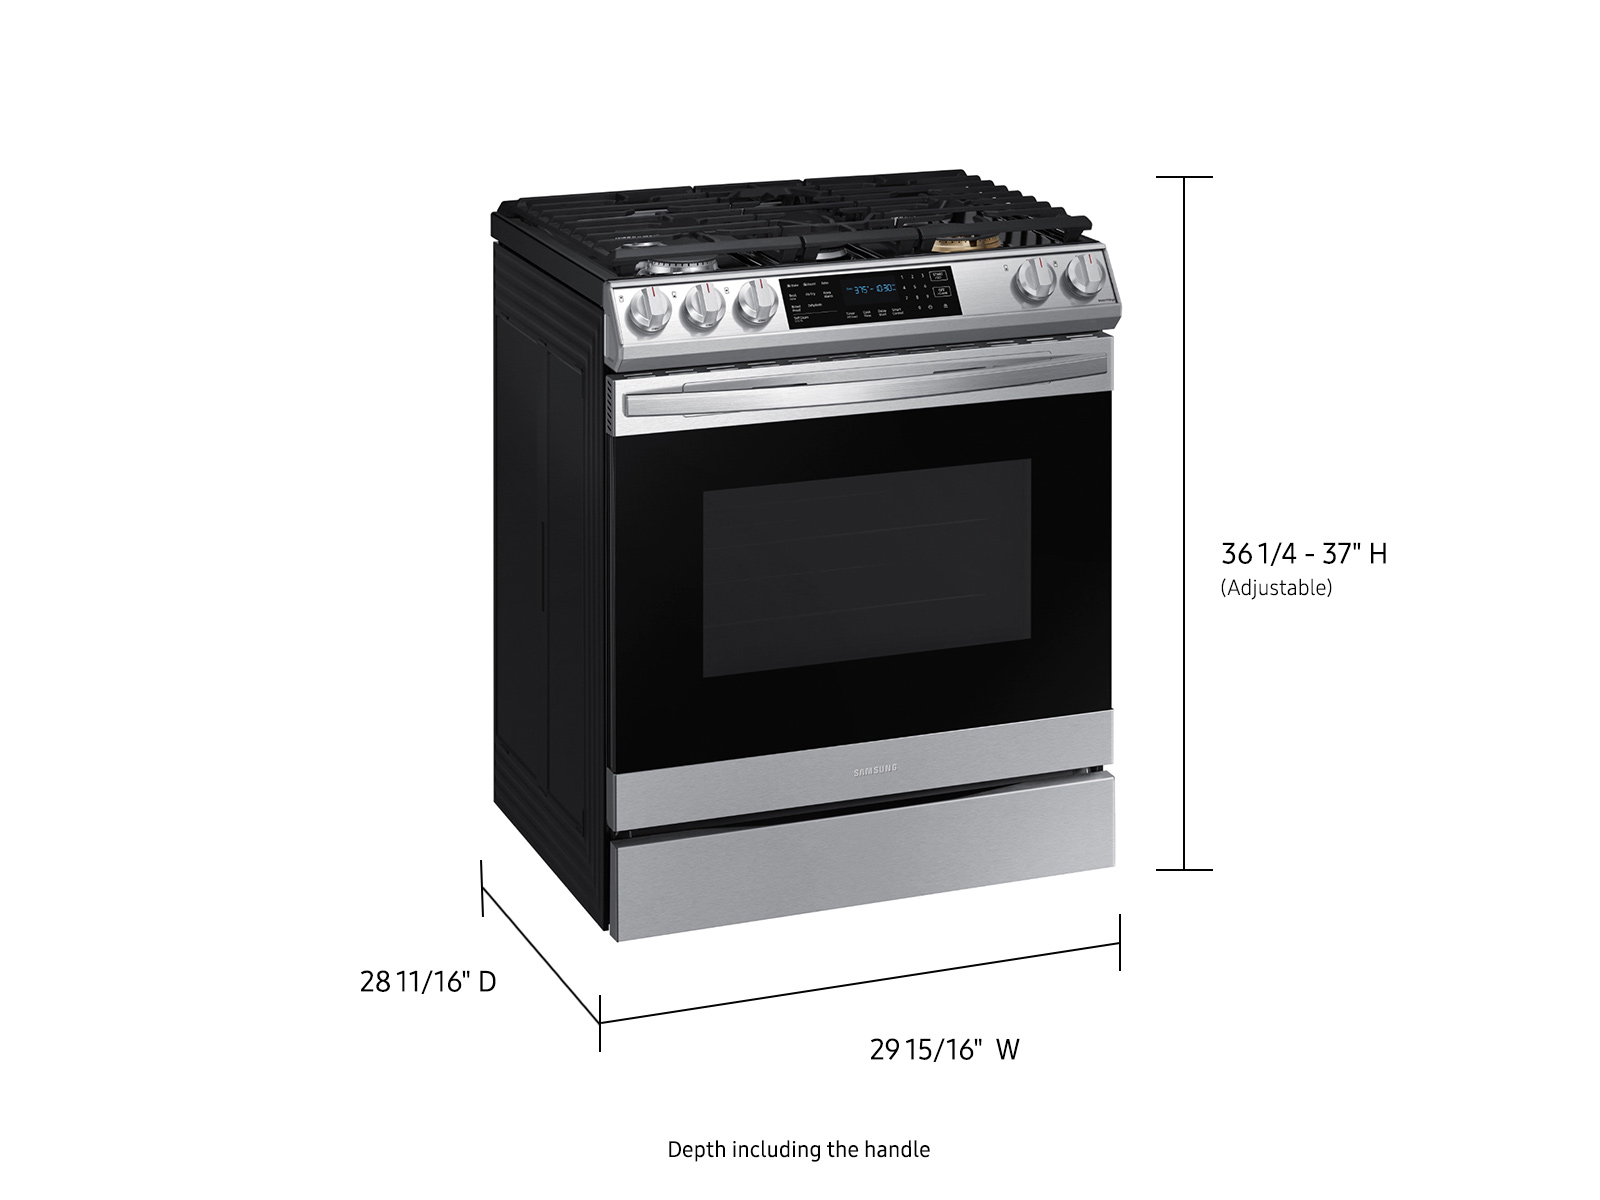 Samsung 30-in 5 Burners 6-cu ft Self-cleaning Air Fry Convection